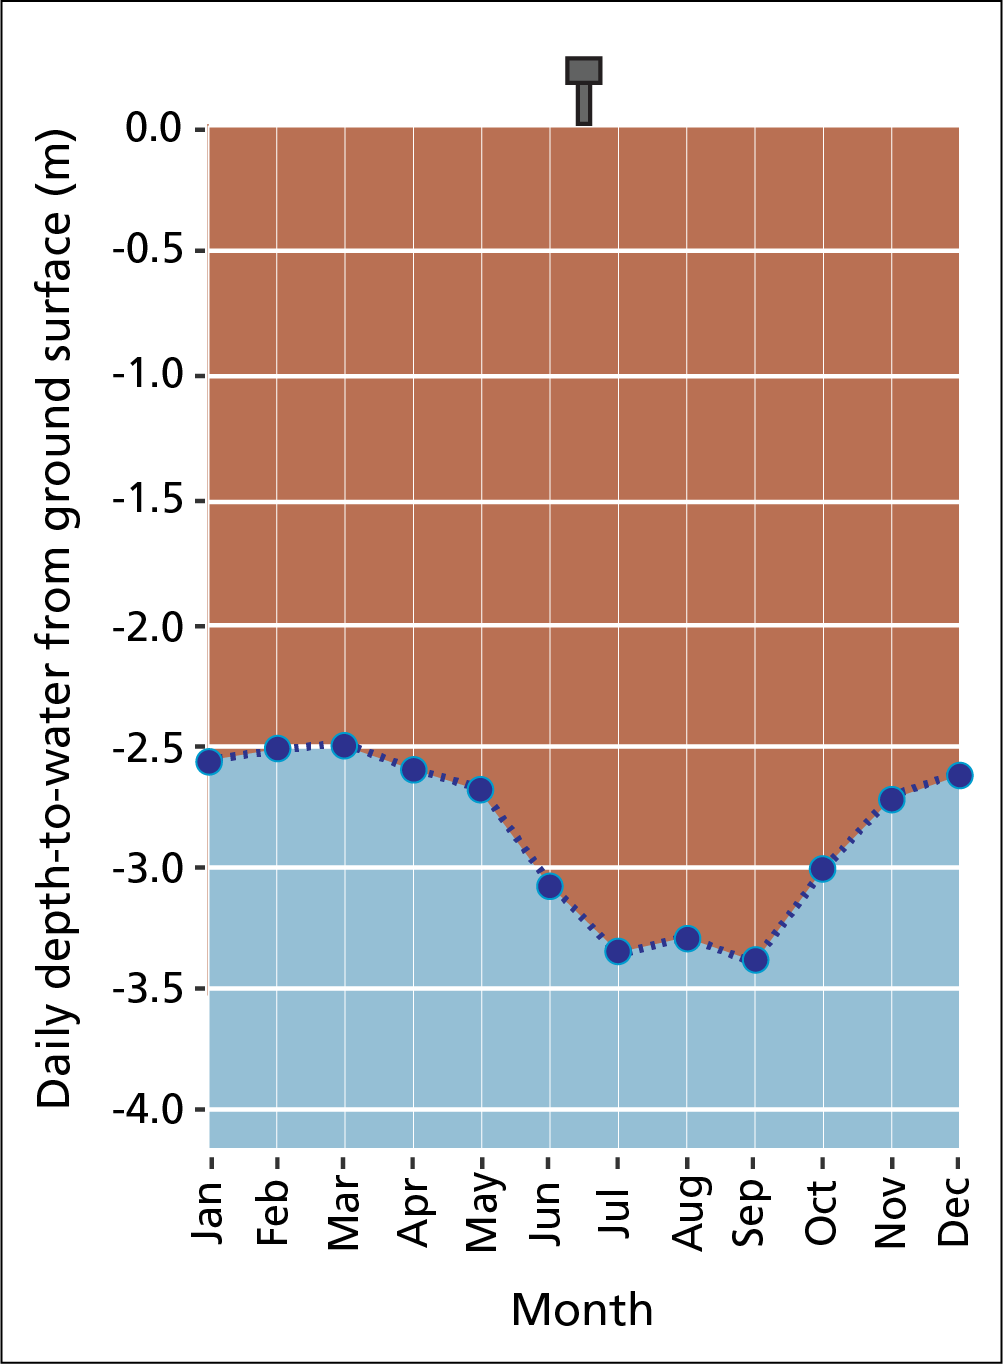 Graph of mean depth to water by month, showing a decrease from March to July and increase from September to December